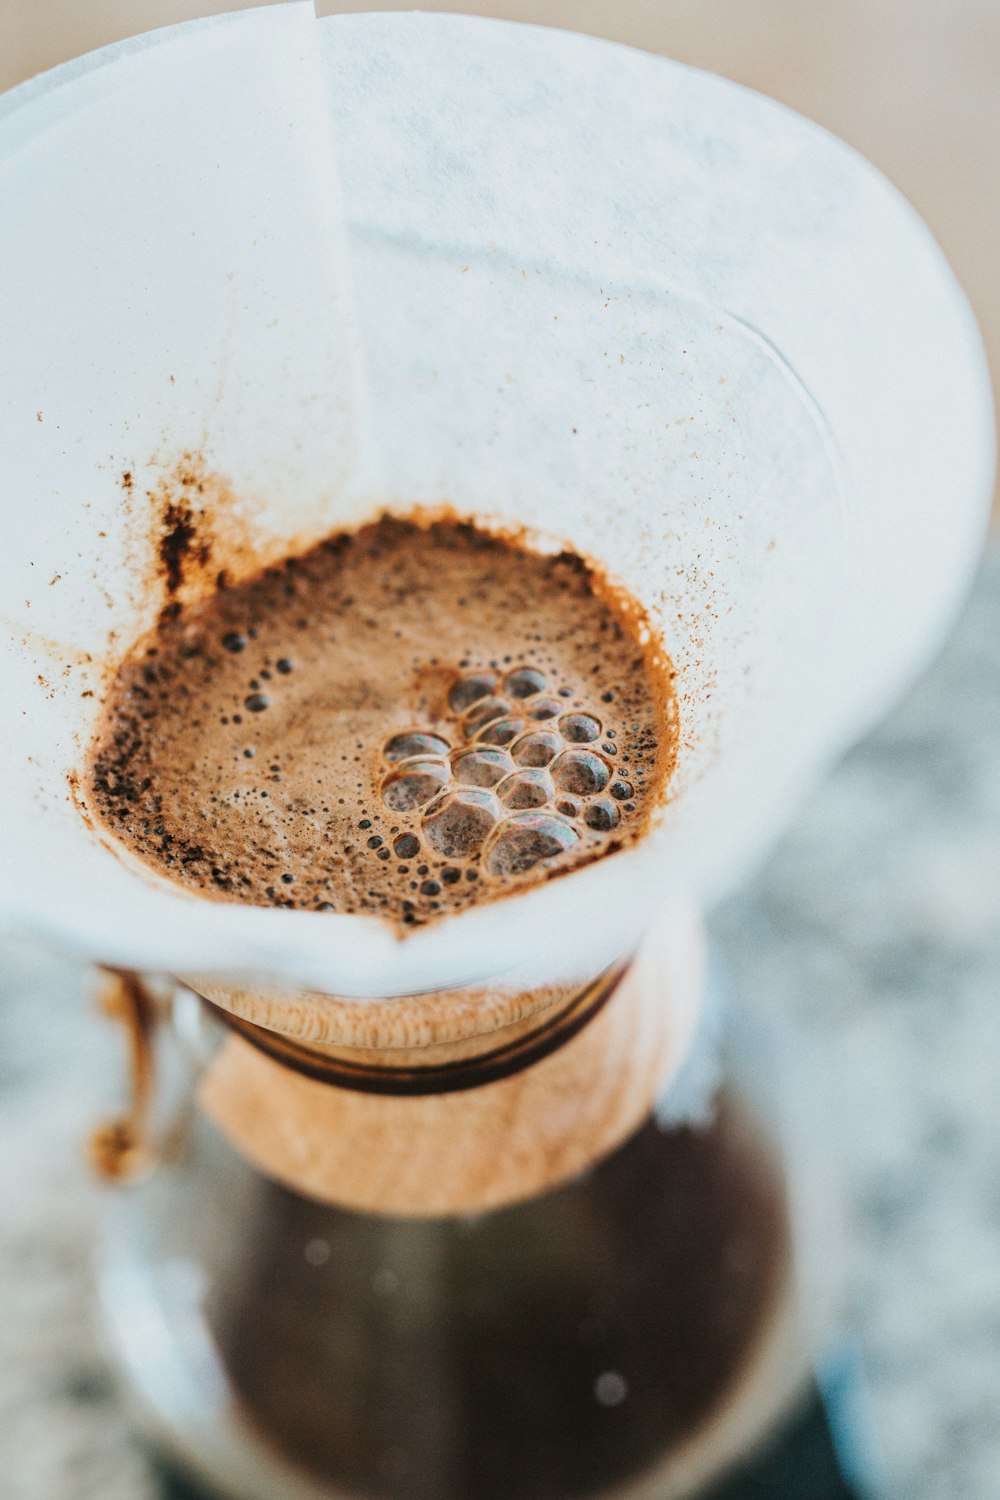 Clear pour-over coffee brewer with digital scale photo – Free Modern plant  Image on Unsplash